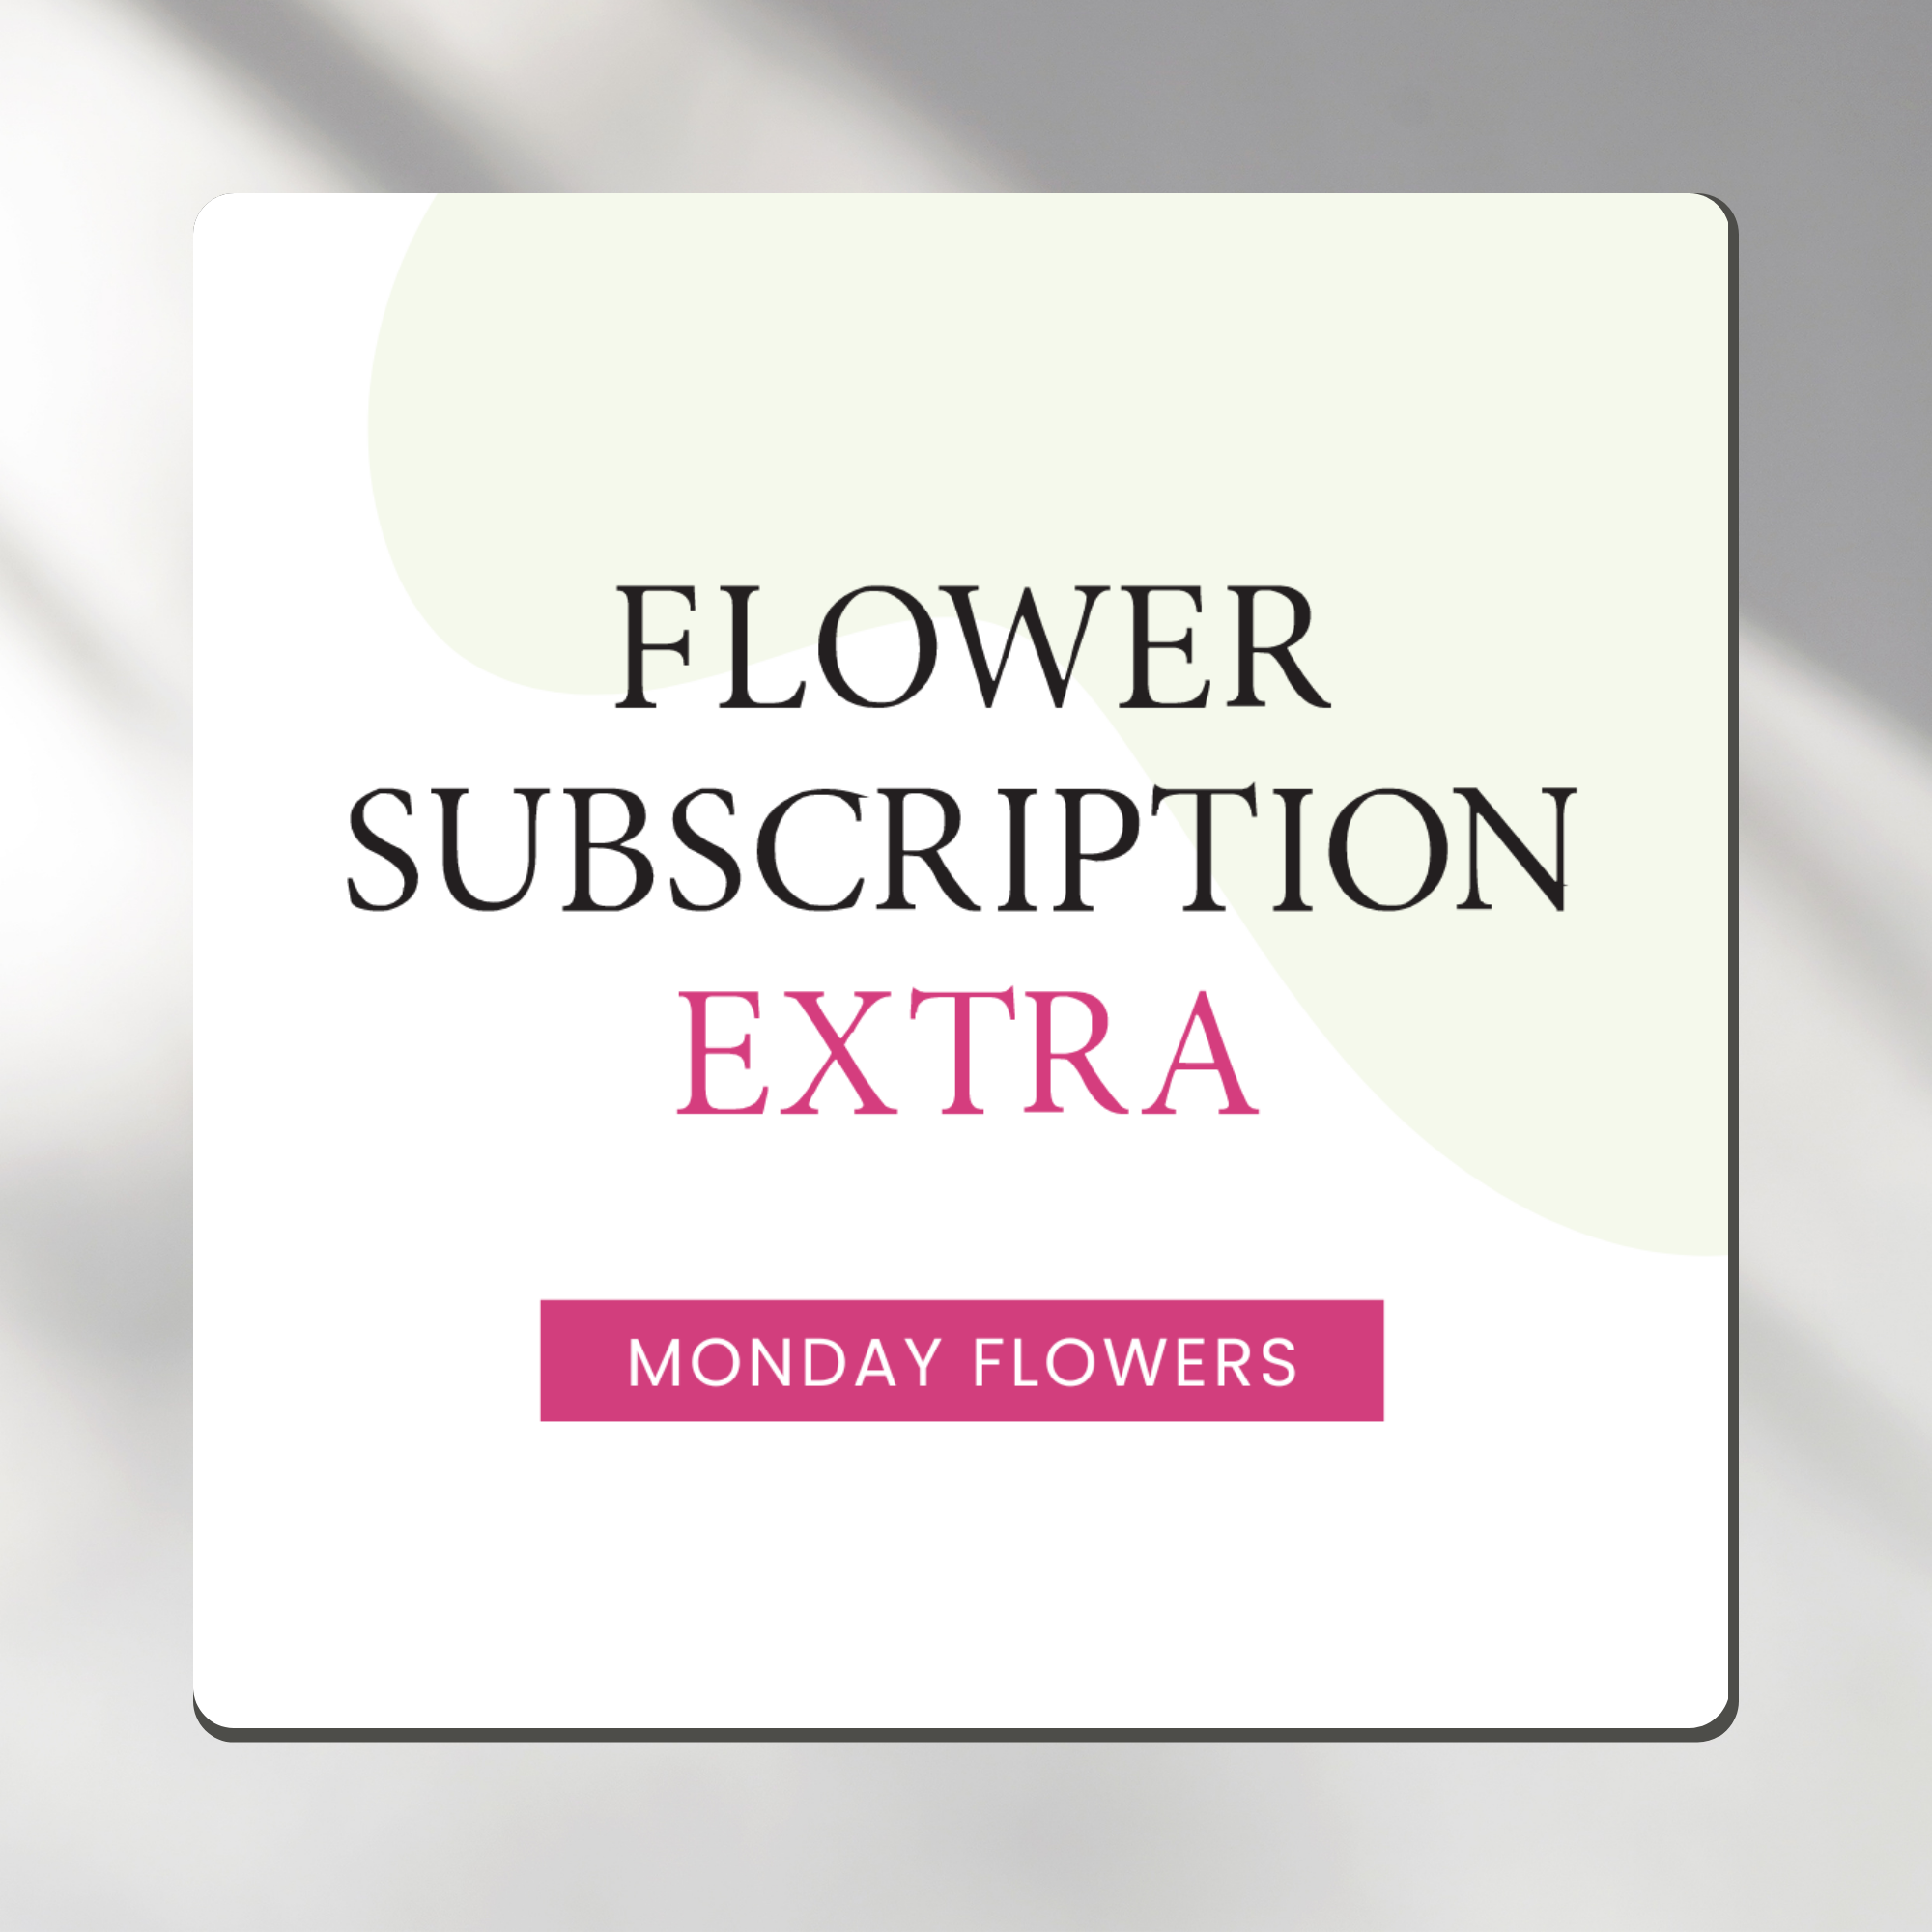 Flower Subscription Extra Monday